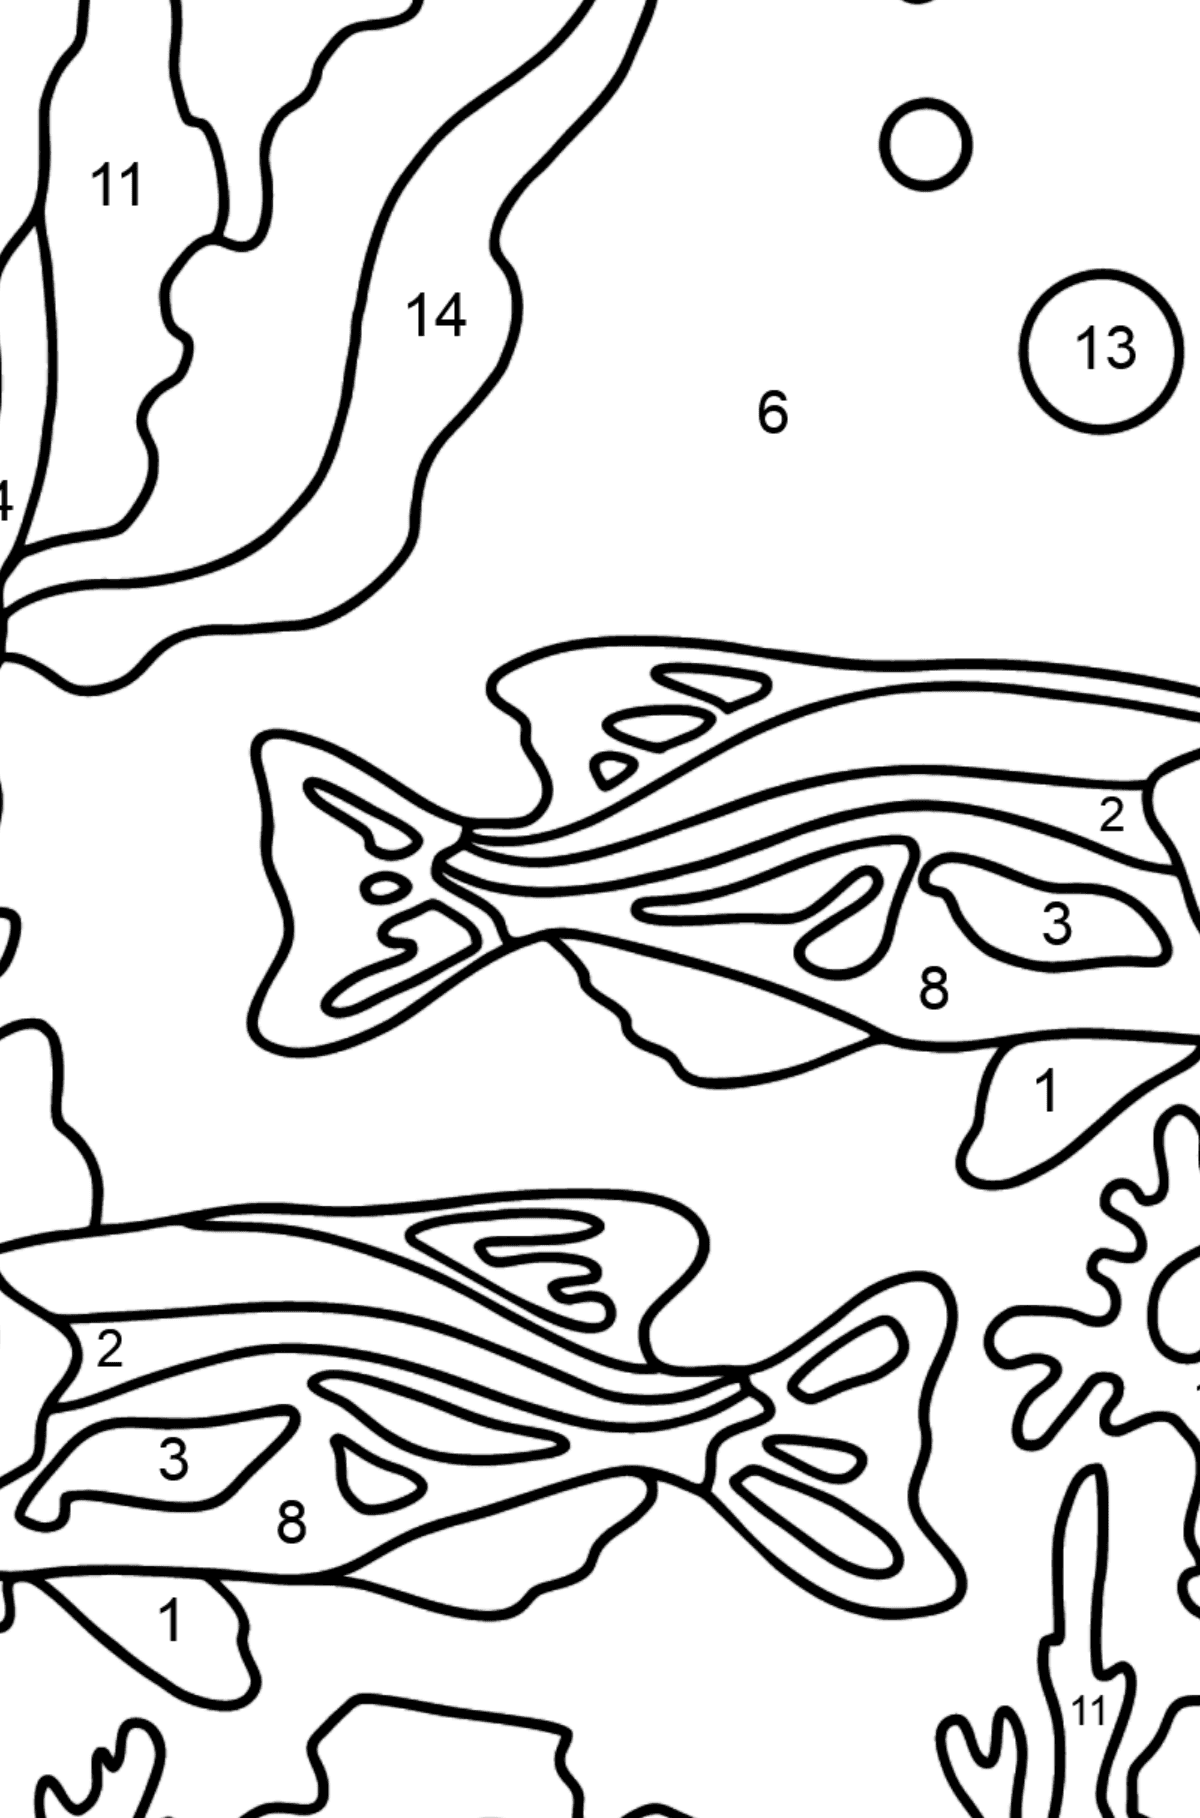 Coloring Page - Fish are Swimming Together Peacefully - Coloring by Numbers for Kids